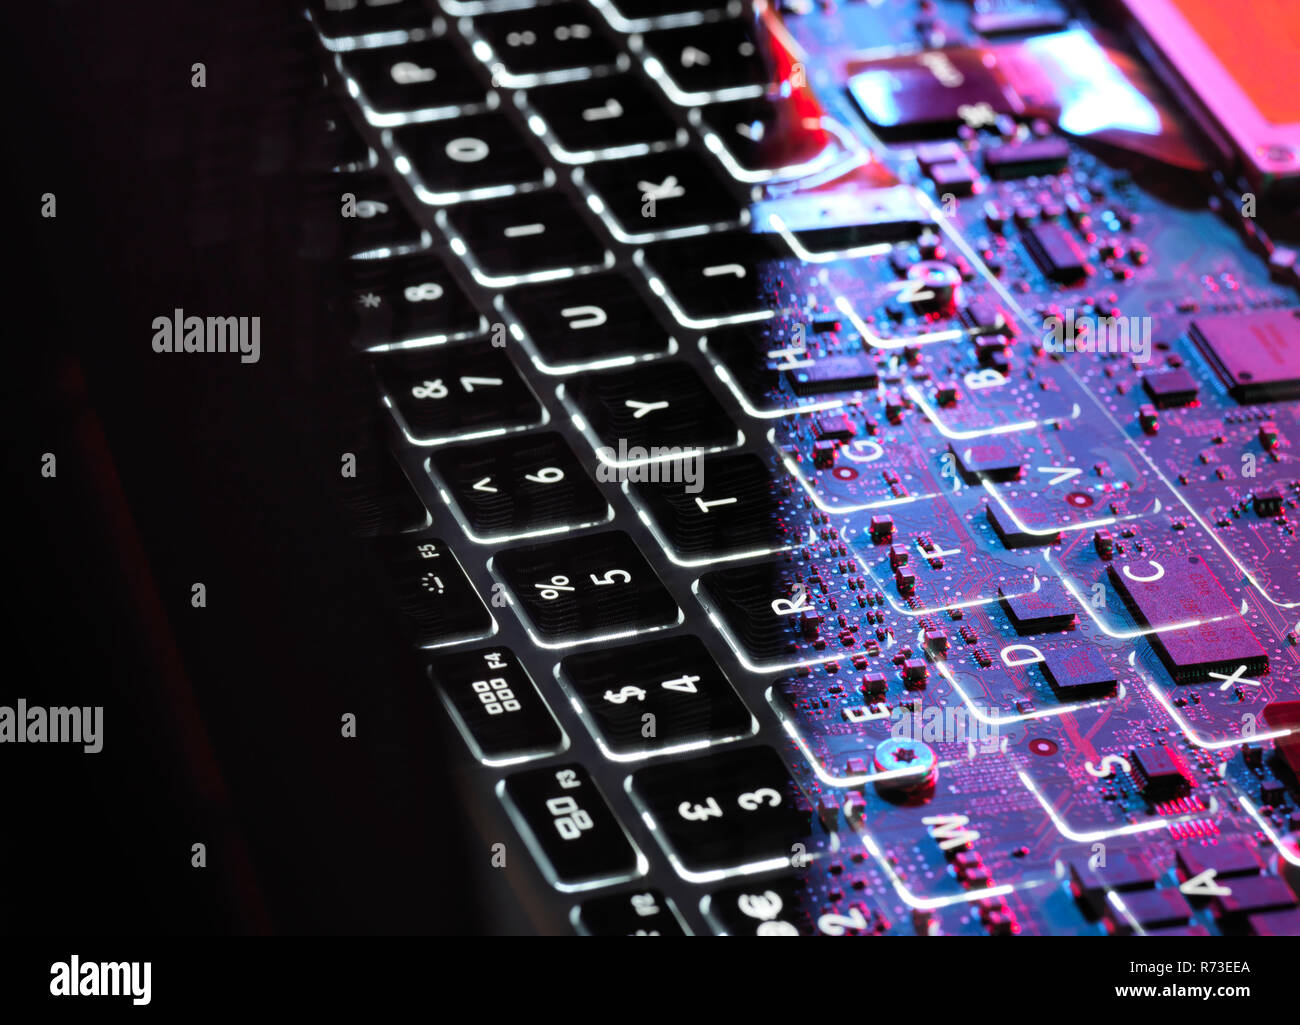 Multiple exposure of laptop computer showing keyboard and circuit board below Stock Photo